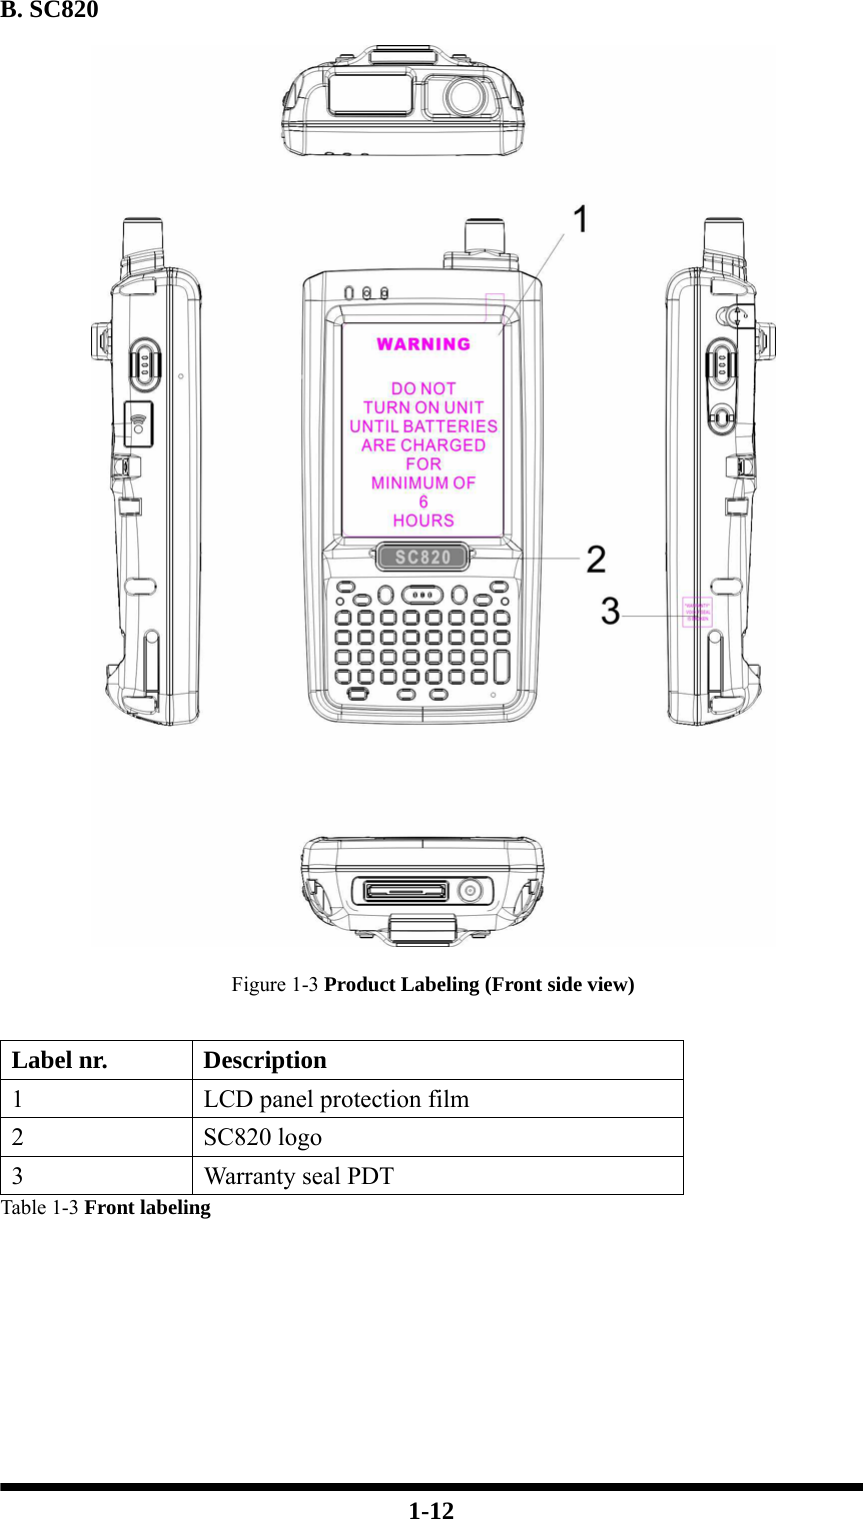  1-12 B. SC820  Figure 1-3 Product Labeling (Front side view)  Label nr.  Description 1  LCD panel protection film 2 SC820 logo 3  Warranty seal PDT Table 1-3 Front labeling   